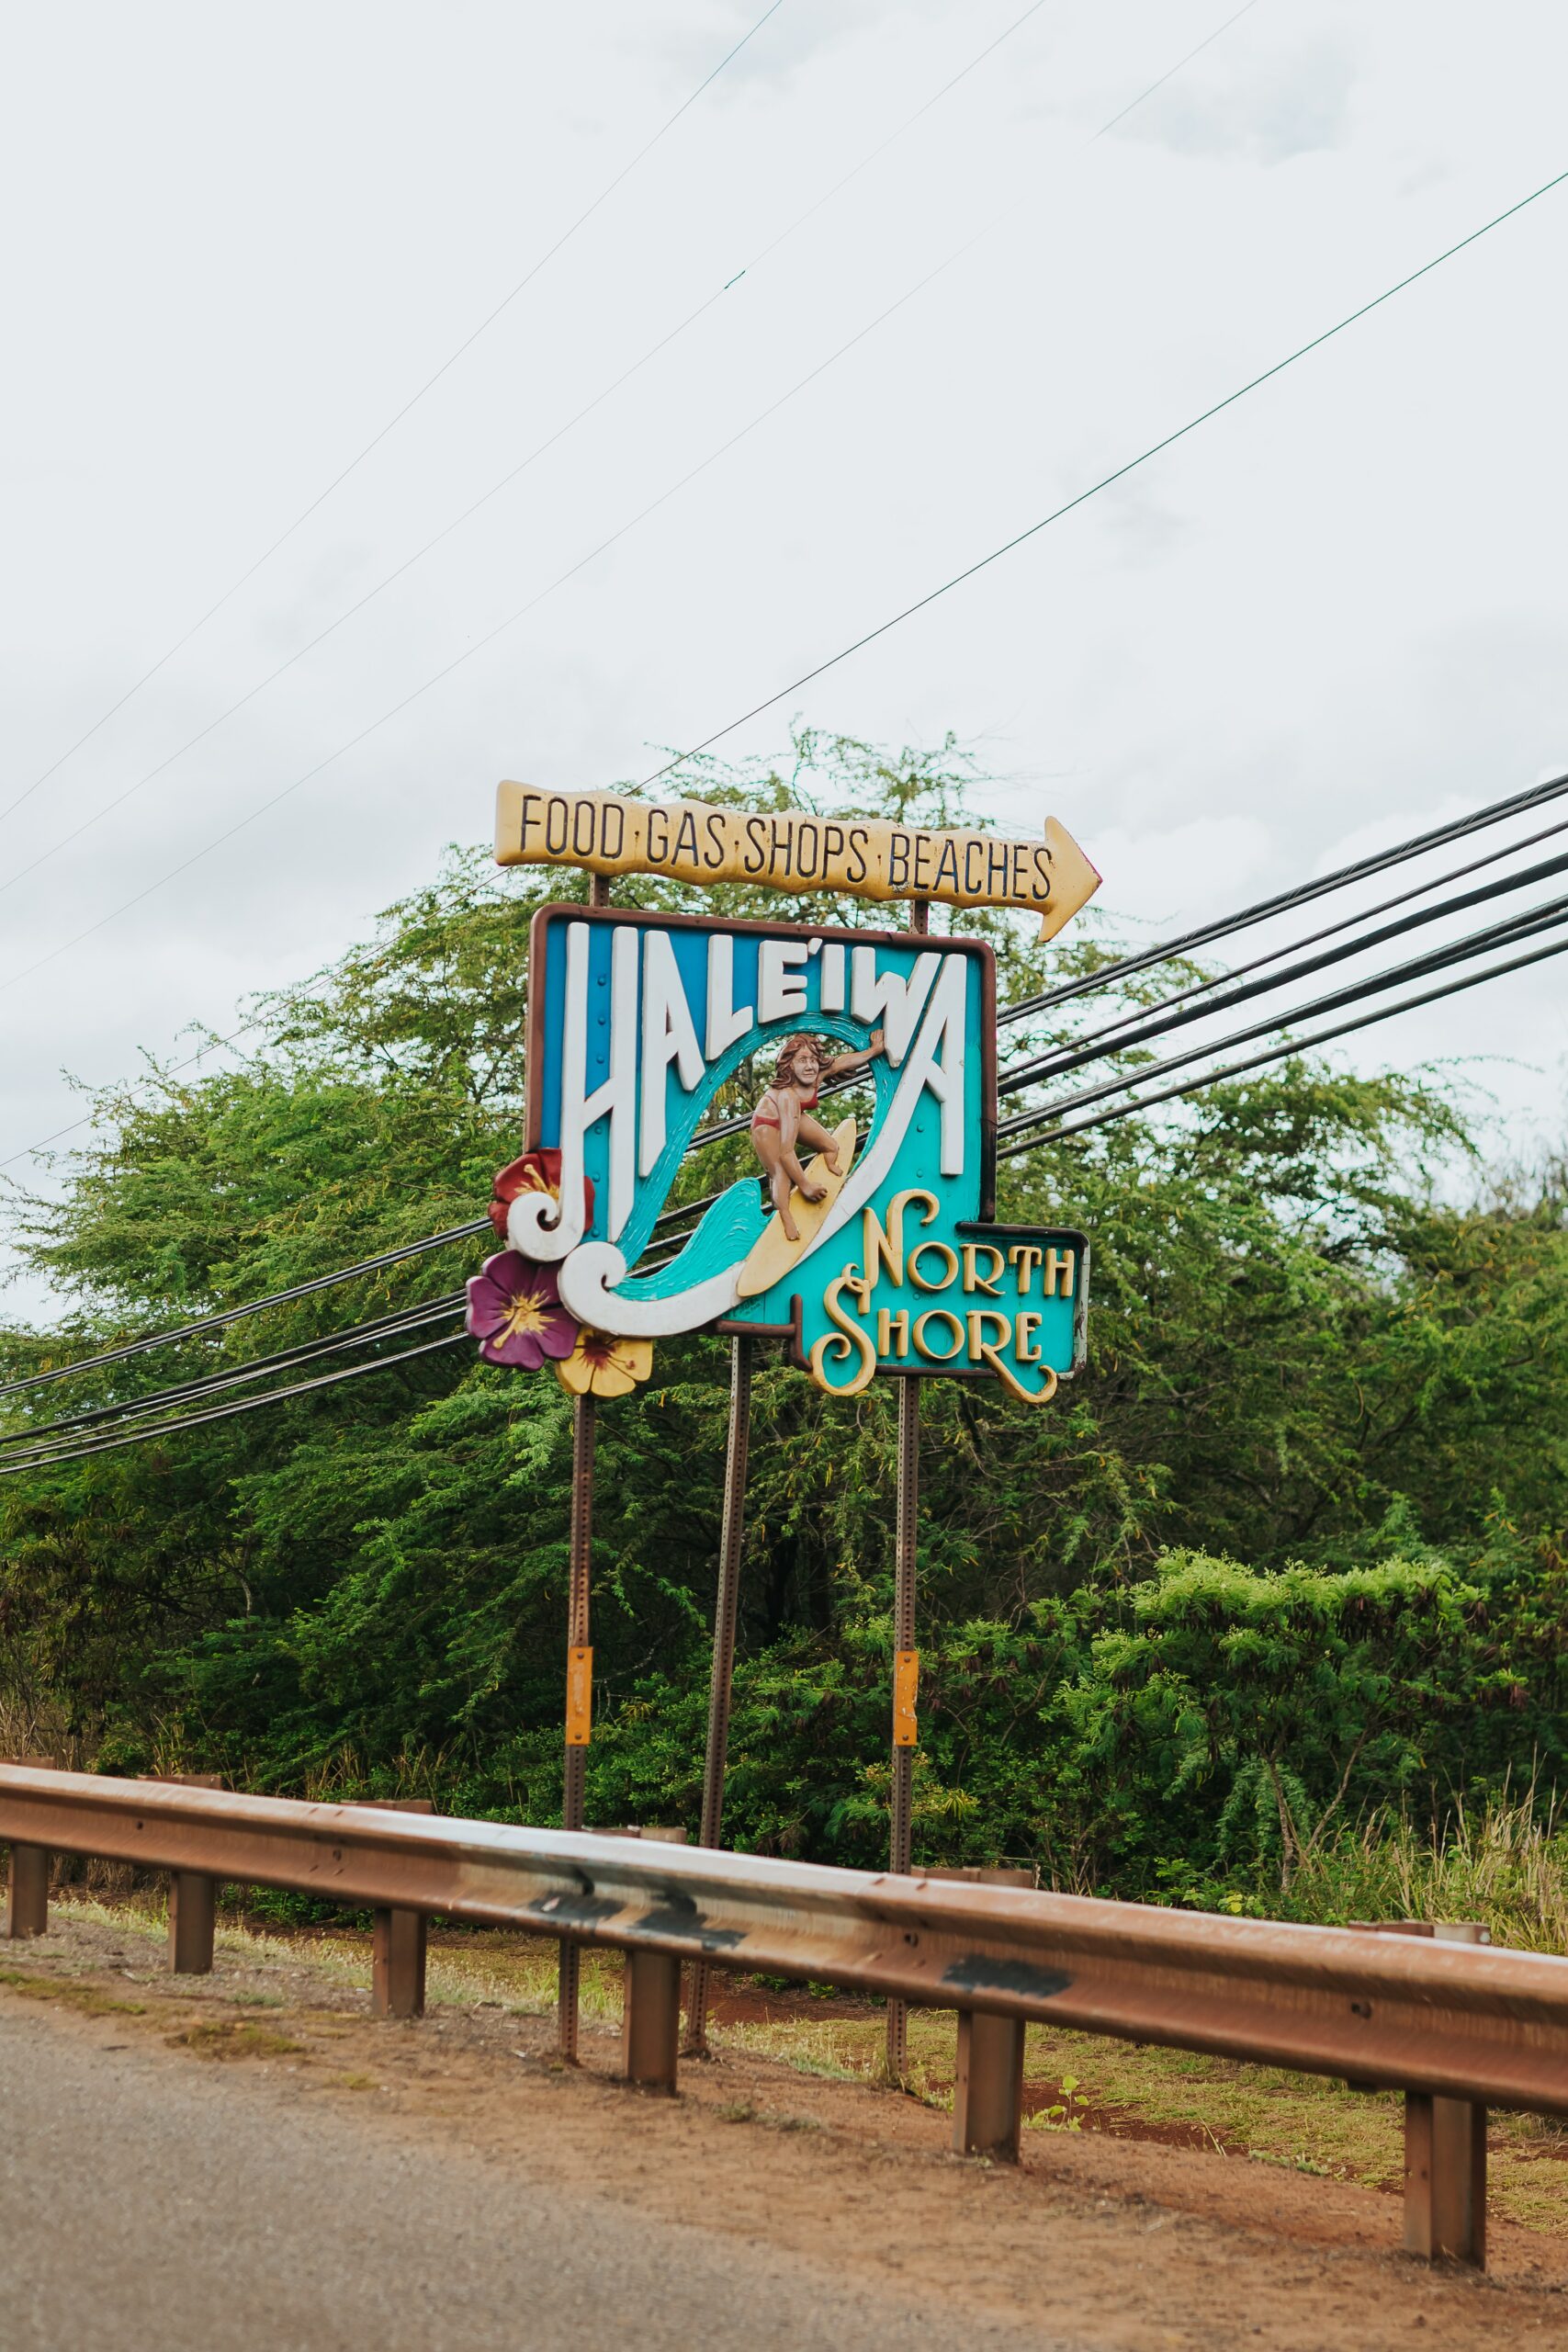 Haleiwa road sign on Oahu's North Shore.